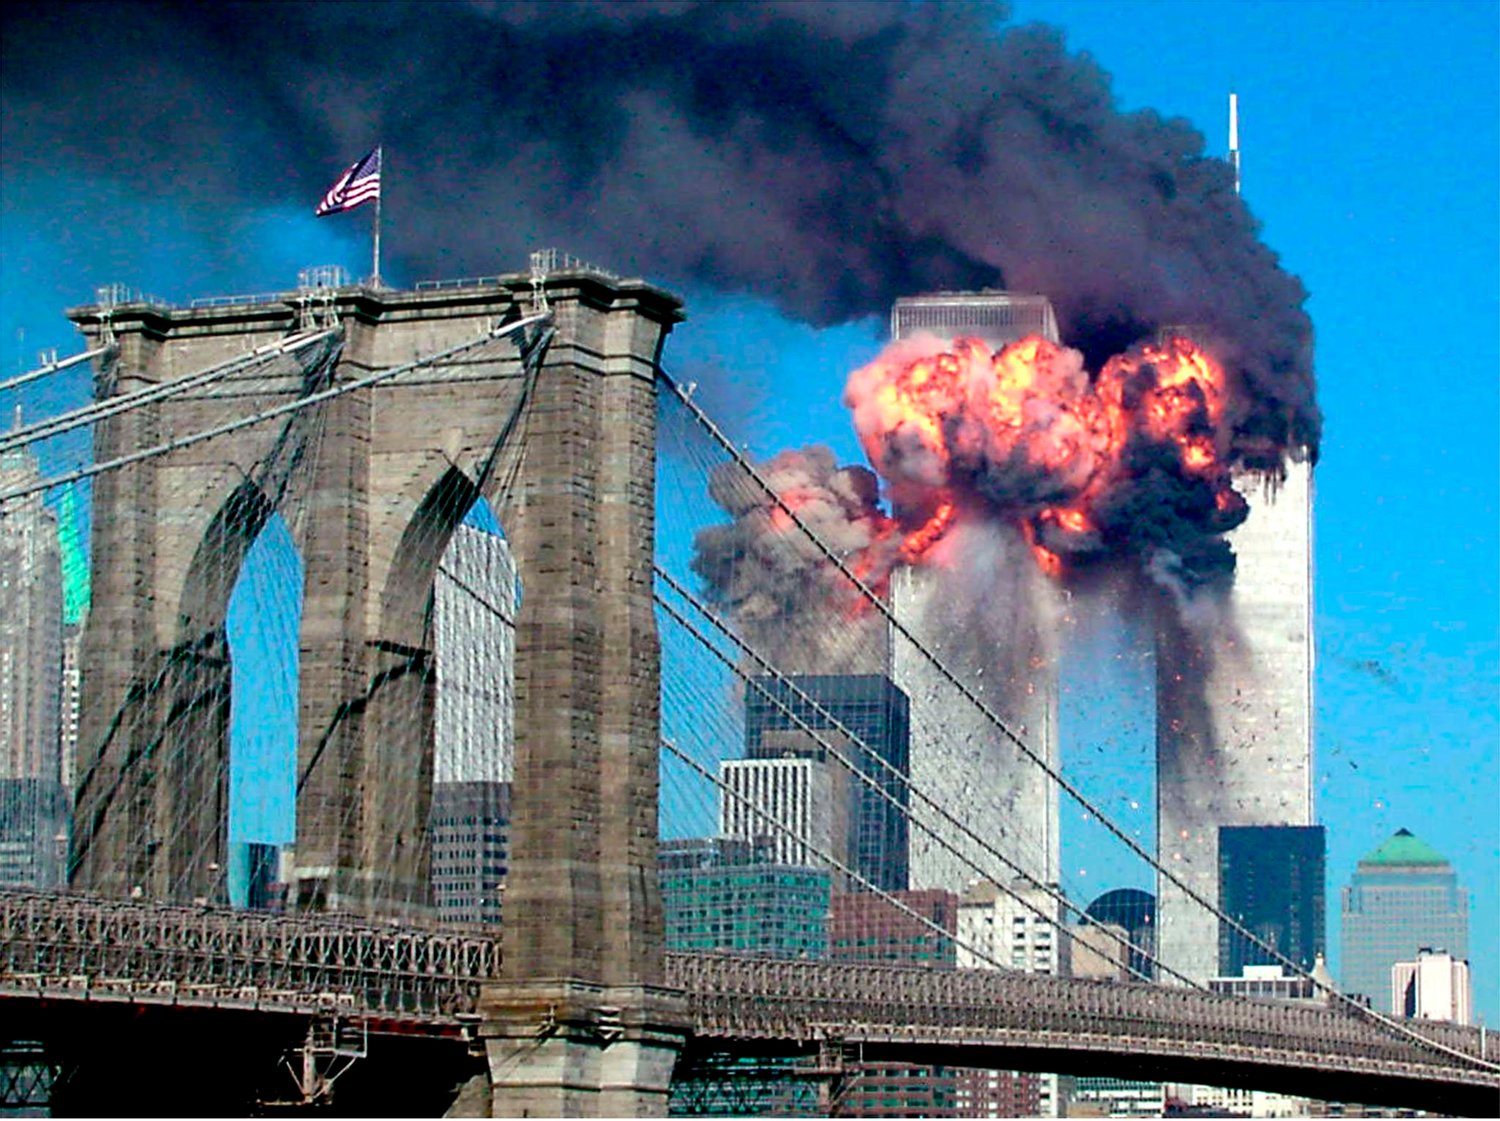 Both towers of the World Trade Center in New York City burn after being hit.by planes Sept. 11, 2001. Both towers of the complex collapsed as a result of airplane attacks on the structures. Nearly 3,000 people died in the collapse of the towers, at the Pentagon and in rural Pennsylvania when terrorists attacked the United States using commercial airplanes.